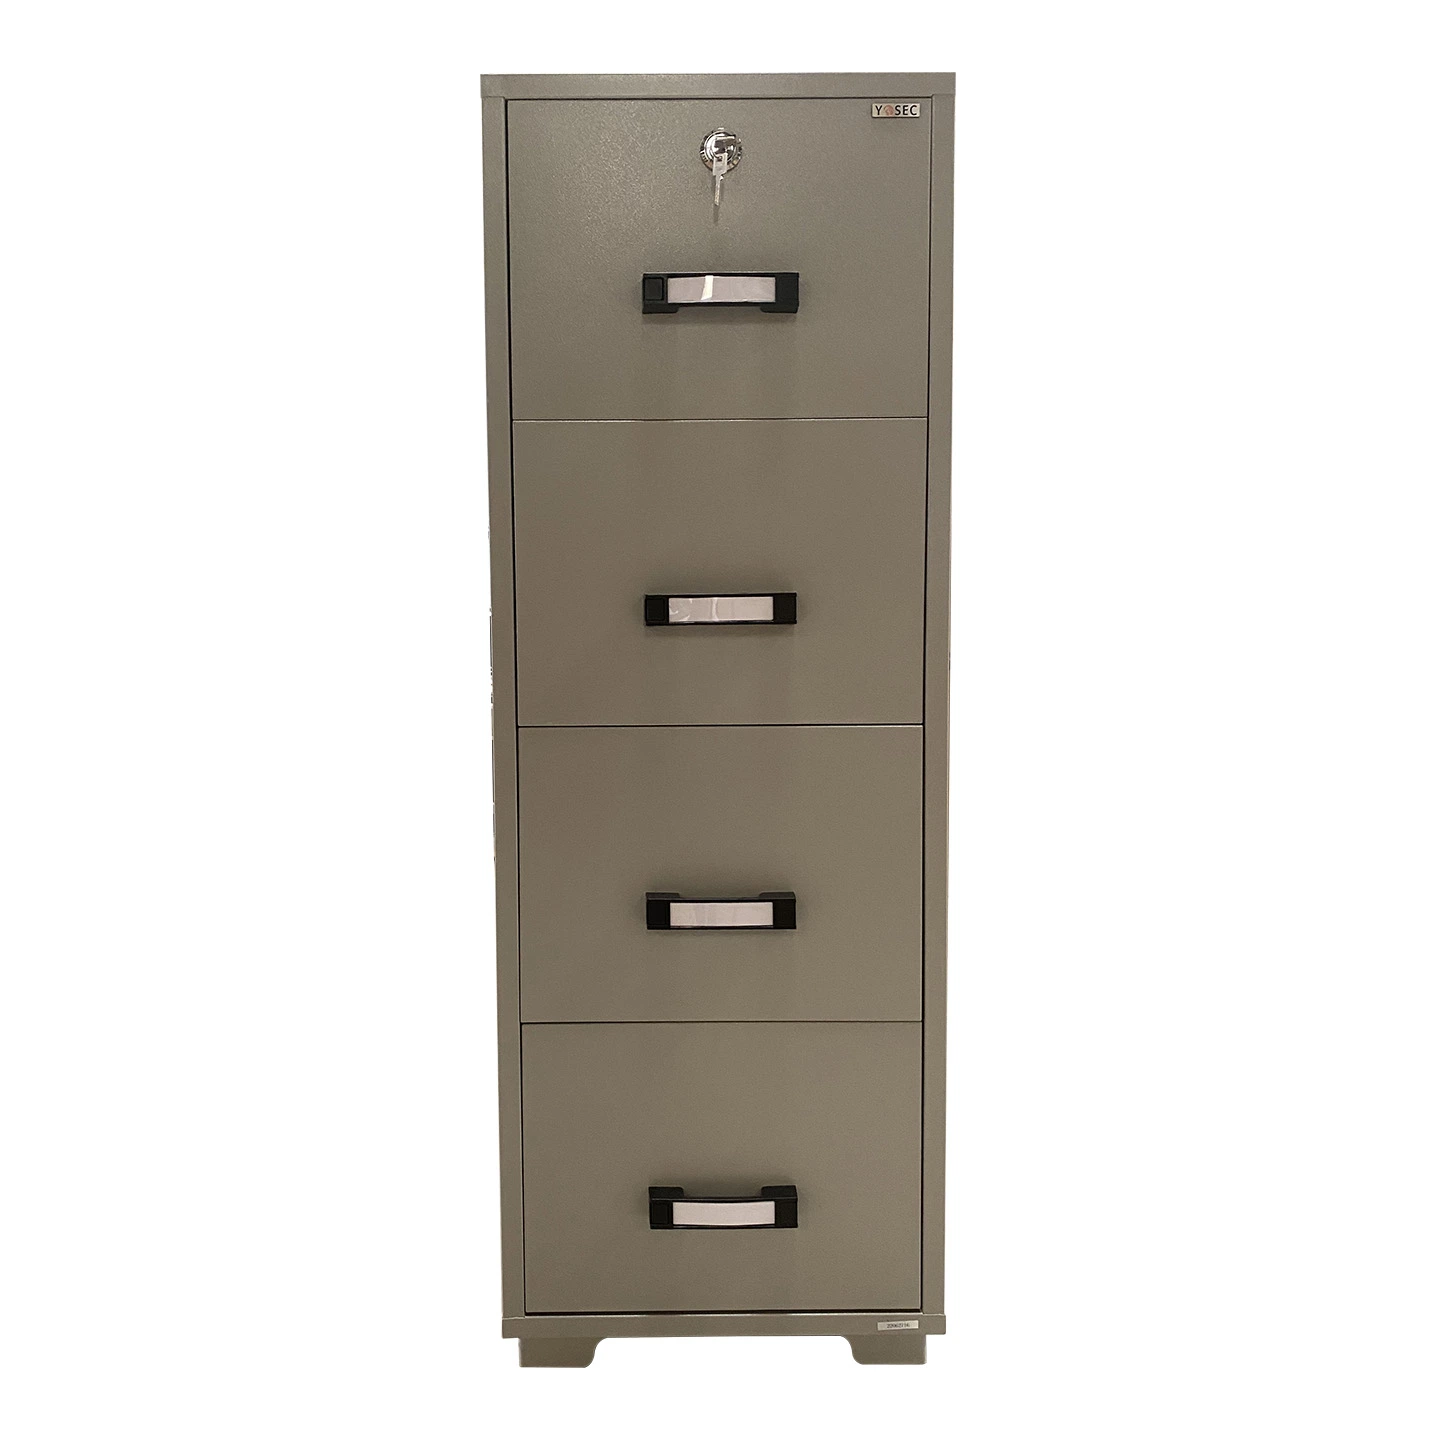 High Quality 120 Minutes Fireproof Filing Cabinet with 4 Drawers